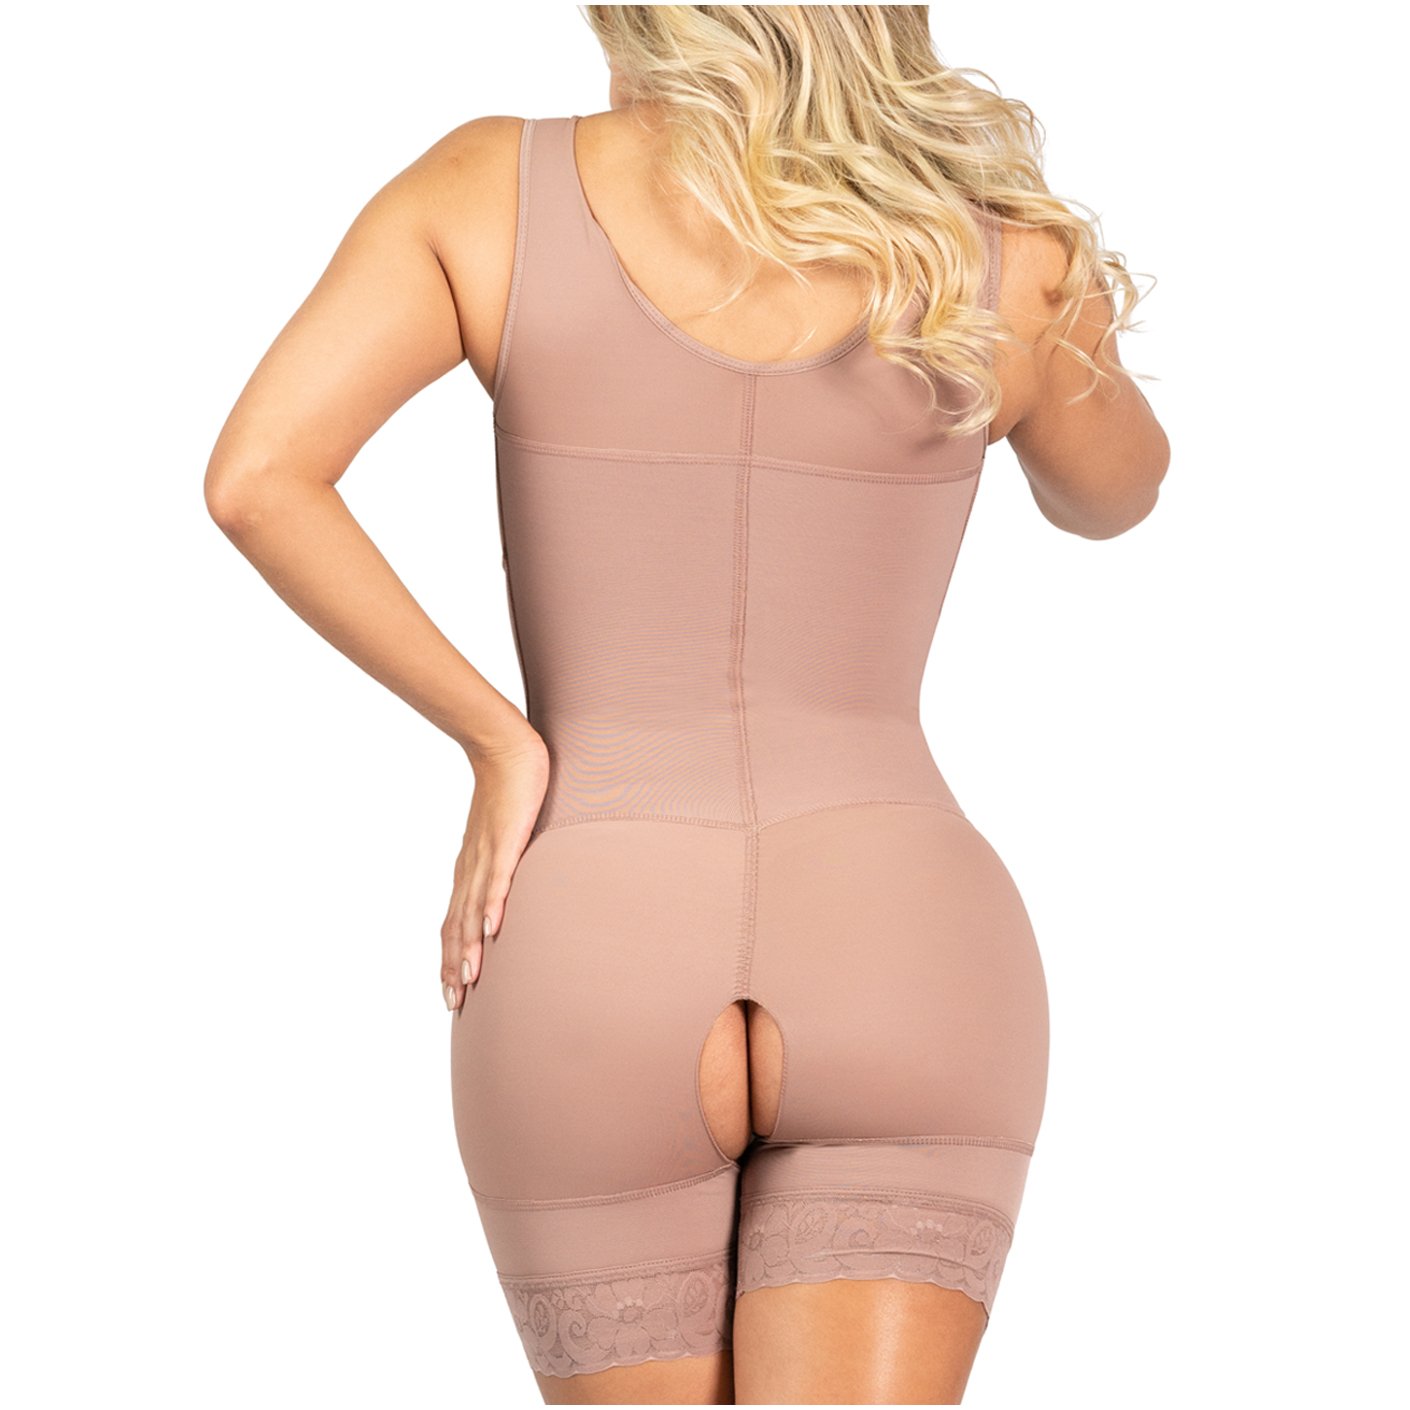 Sonryse 085 | Bodysuit Shapewear with Built-in Bra | Postpartum, Post Surgery, First Stage Use - fajacolombian